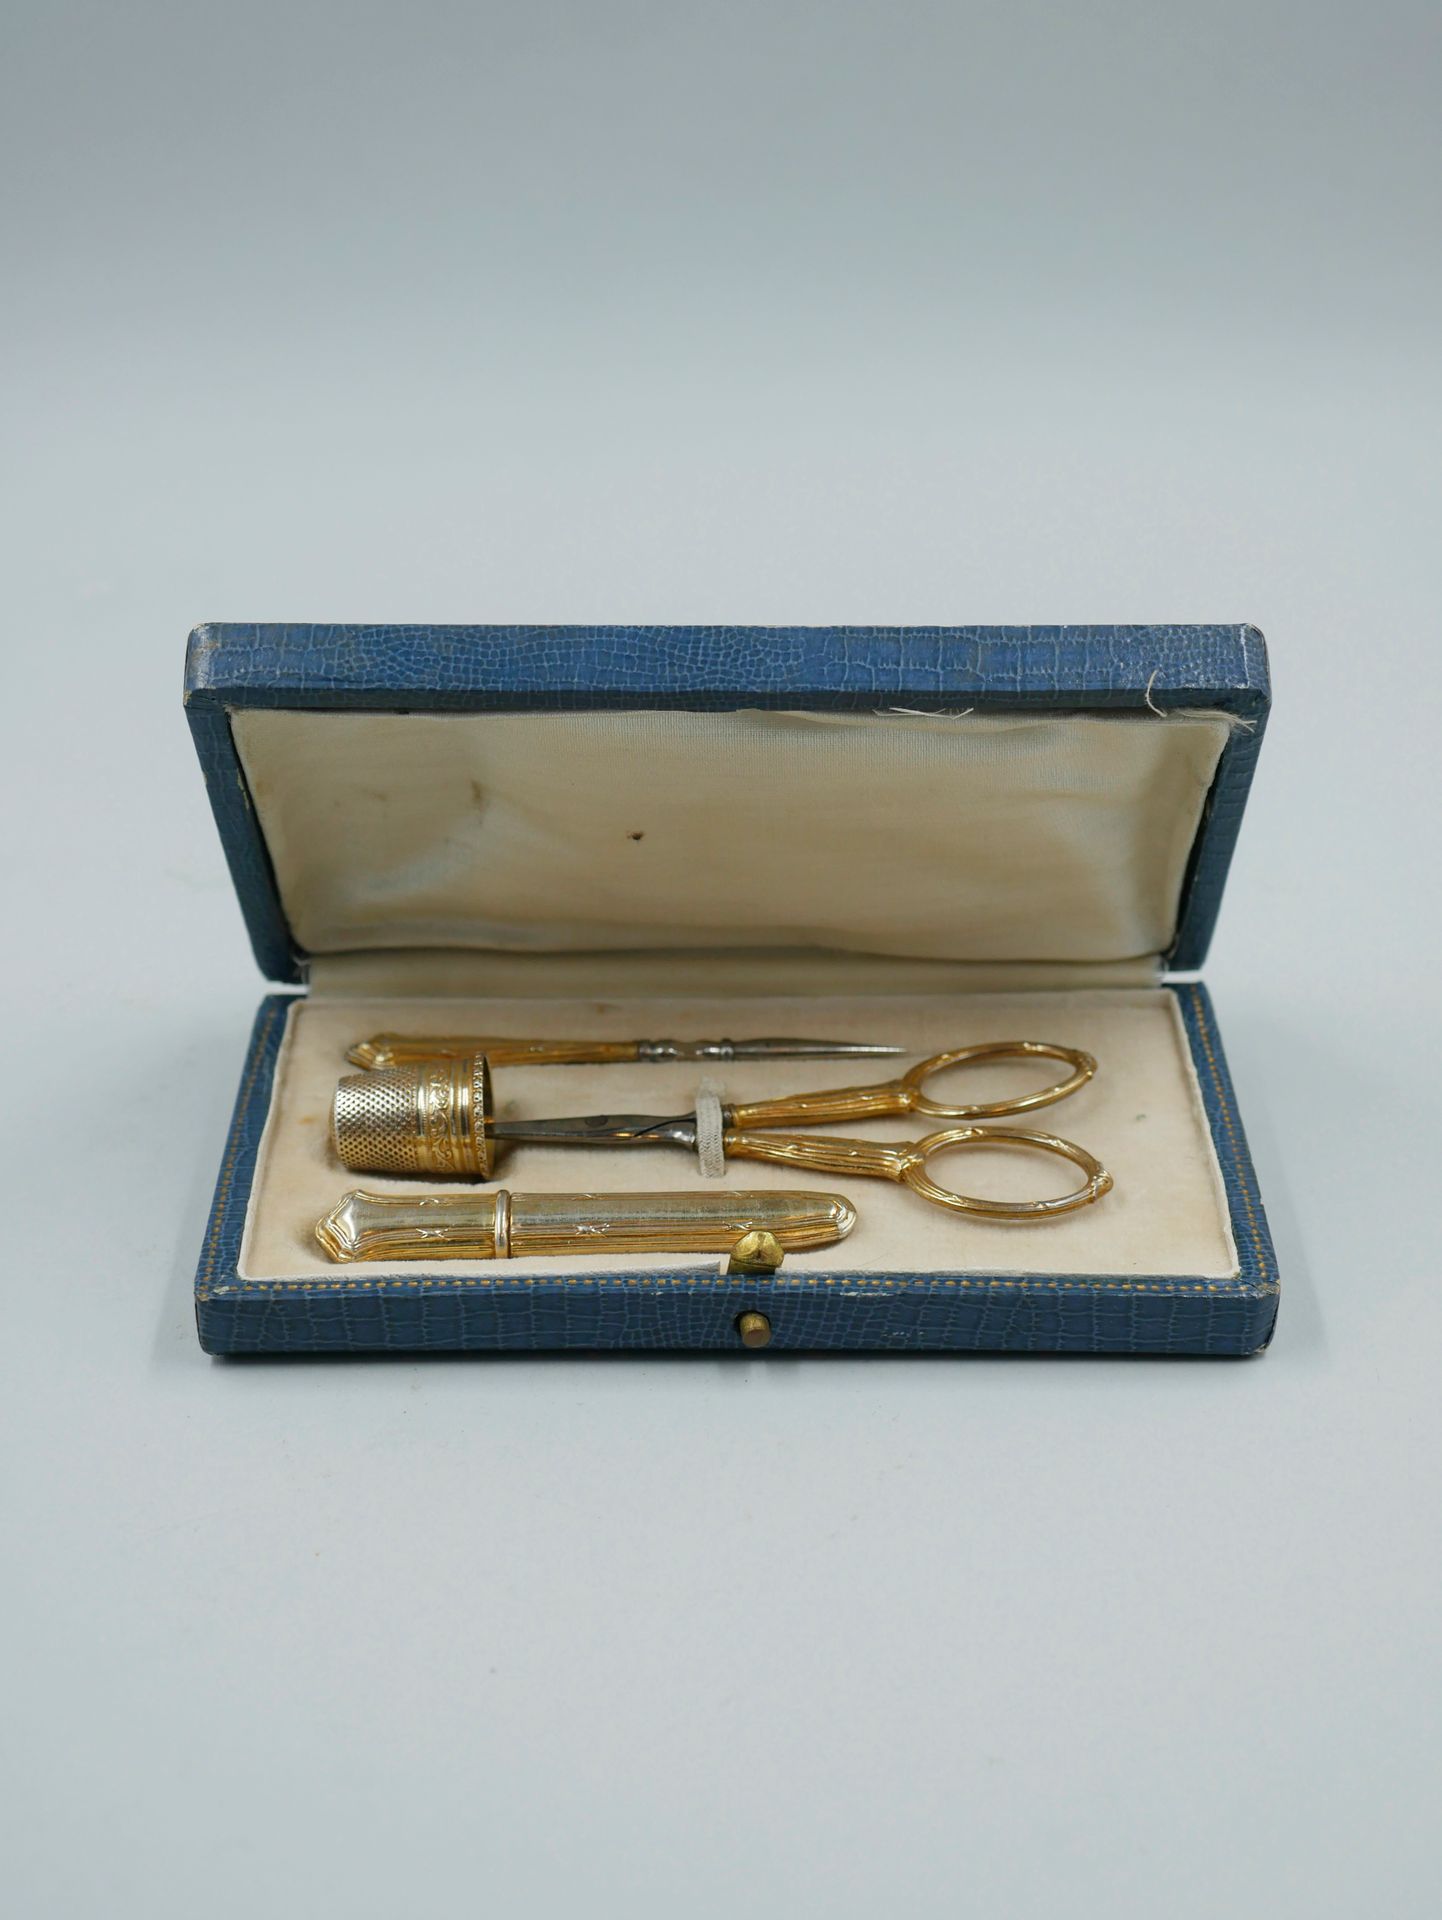 Null Silver and metal sewing kit in its case. 19th century. PB : 15,90 gr